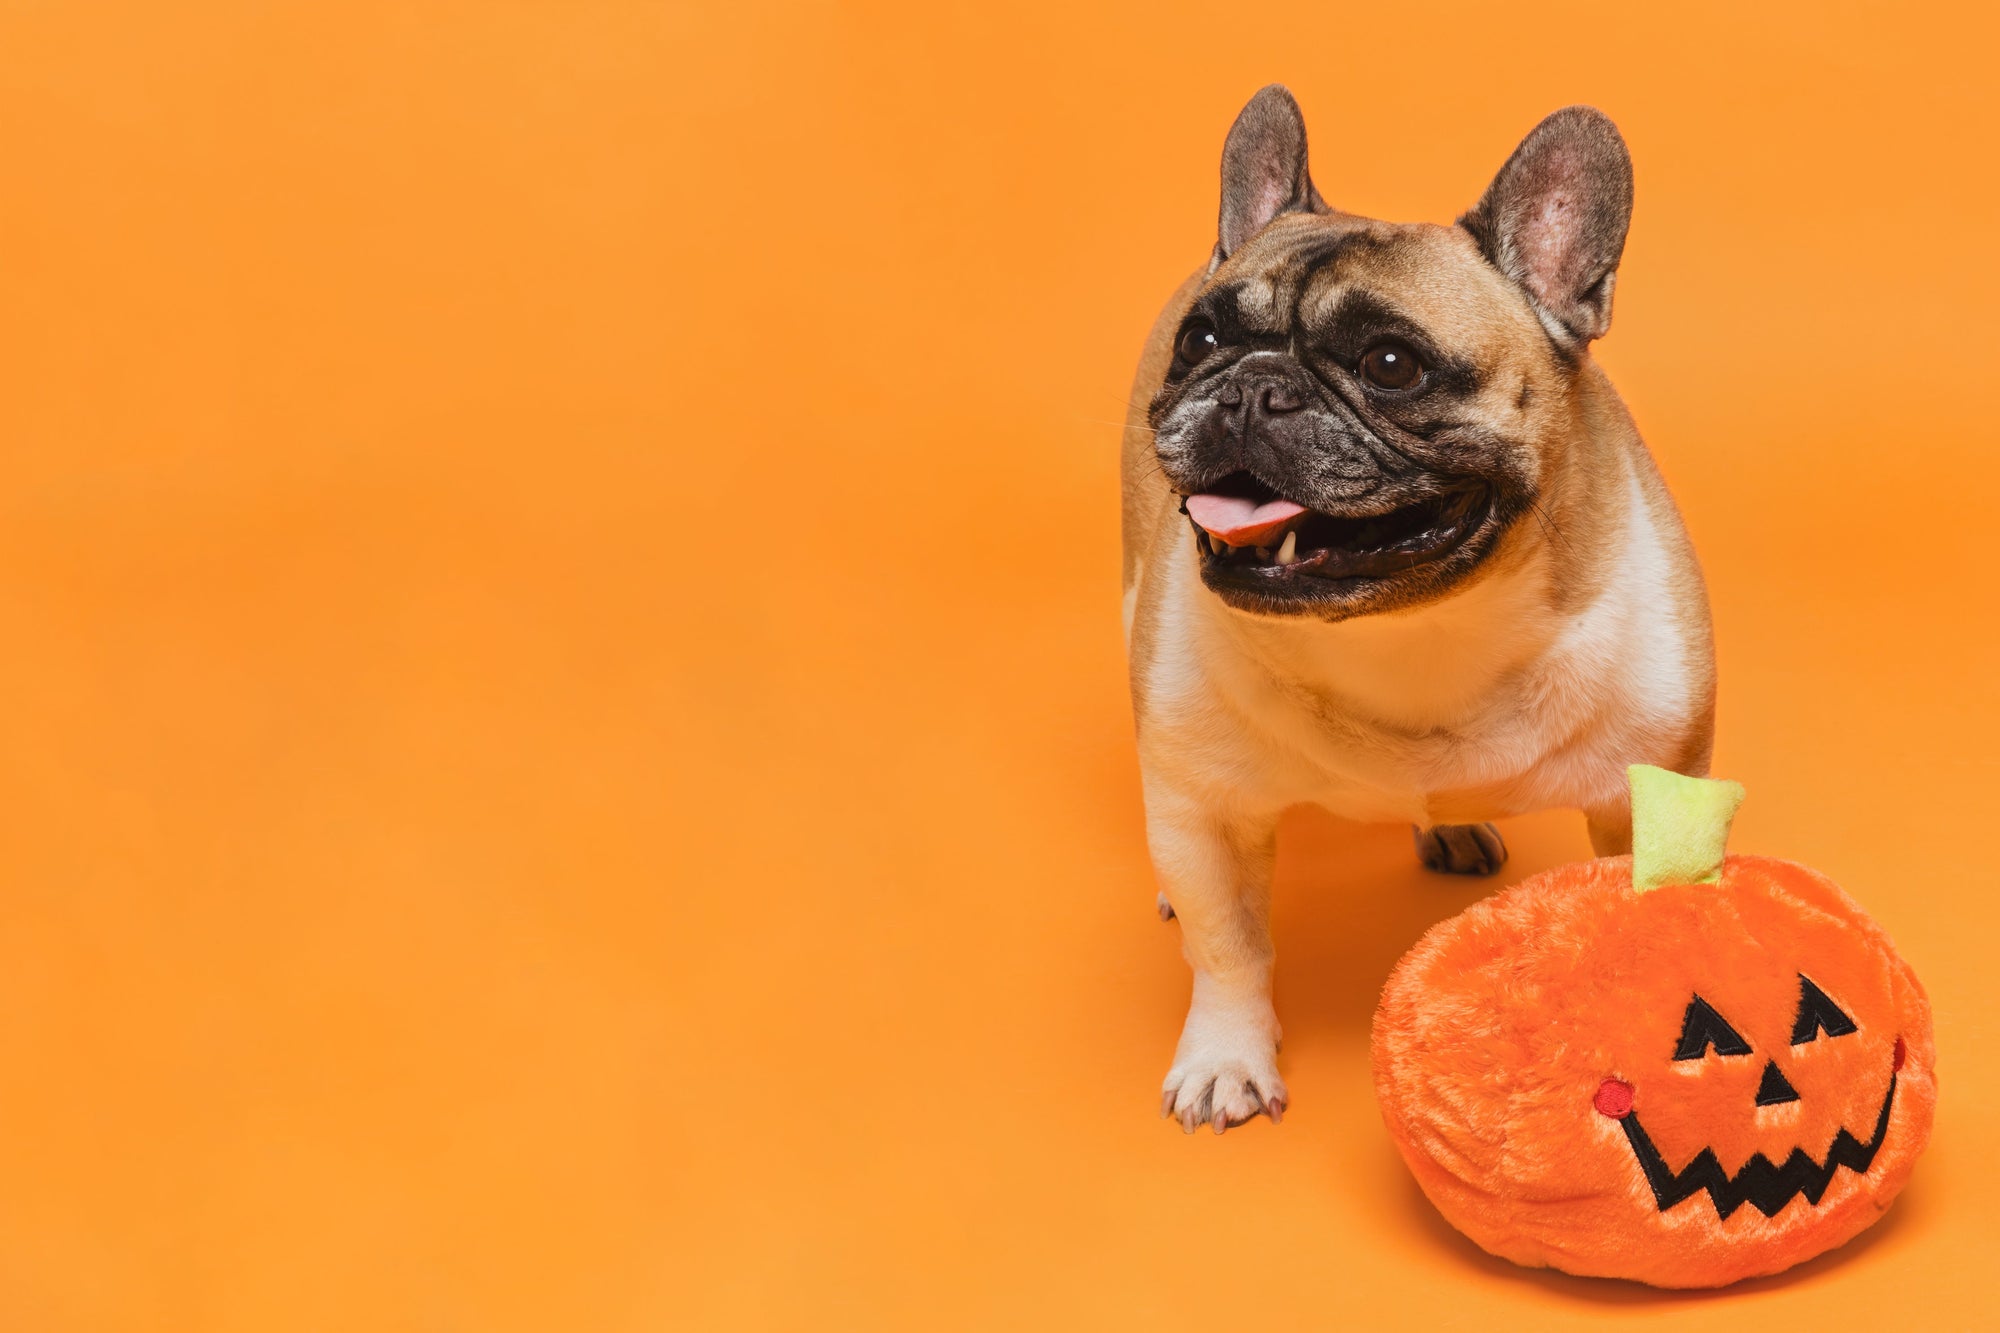 Don't Let Halloween be a Scary Time for Pets